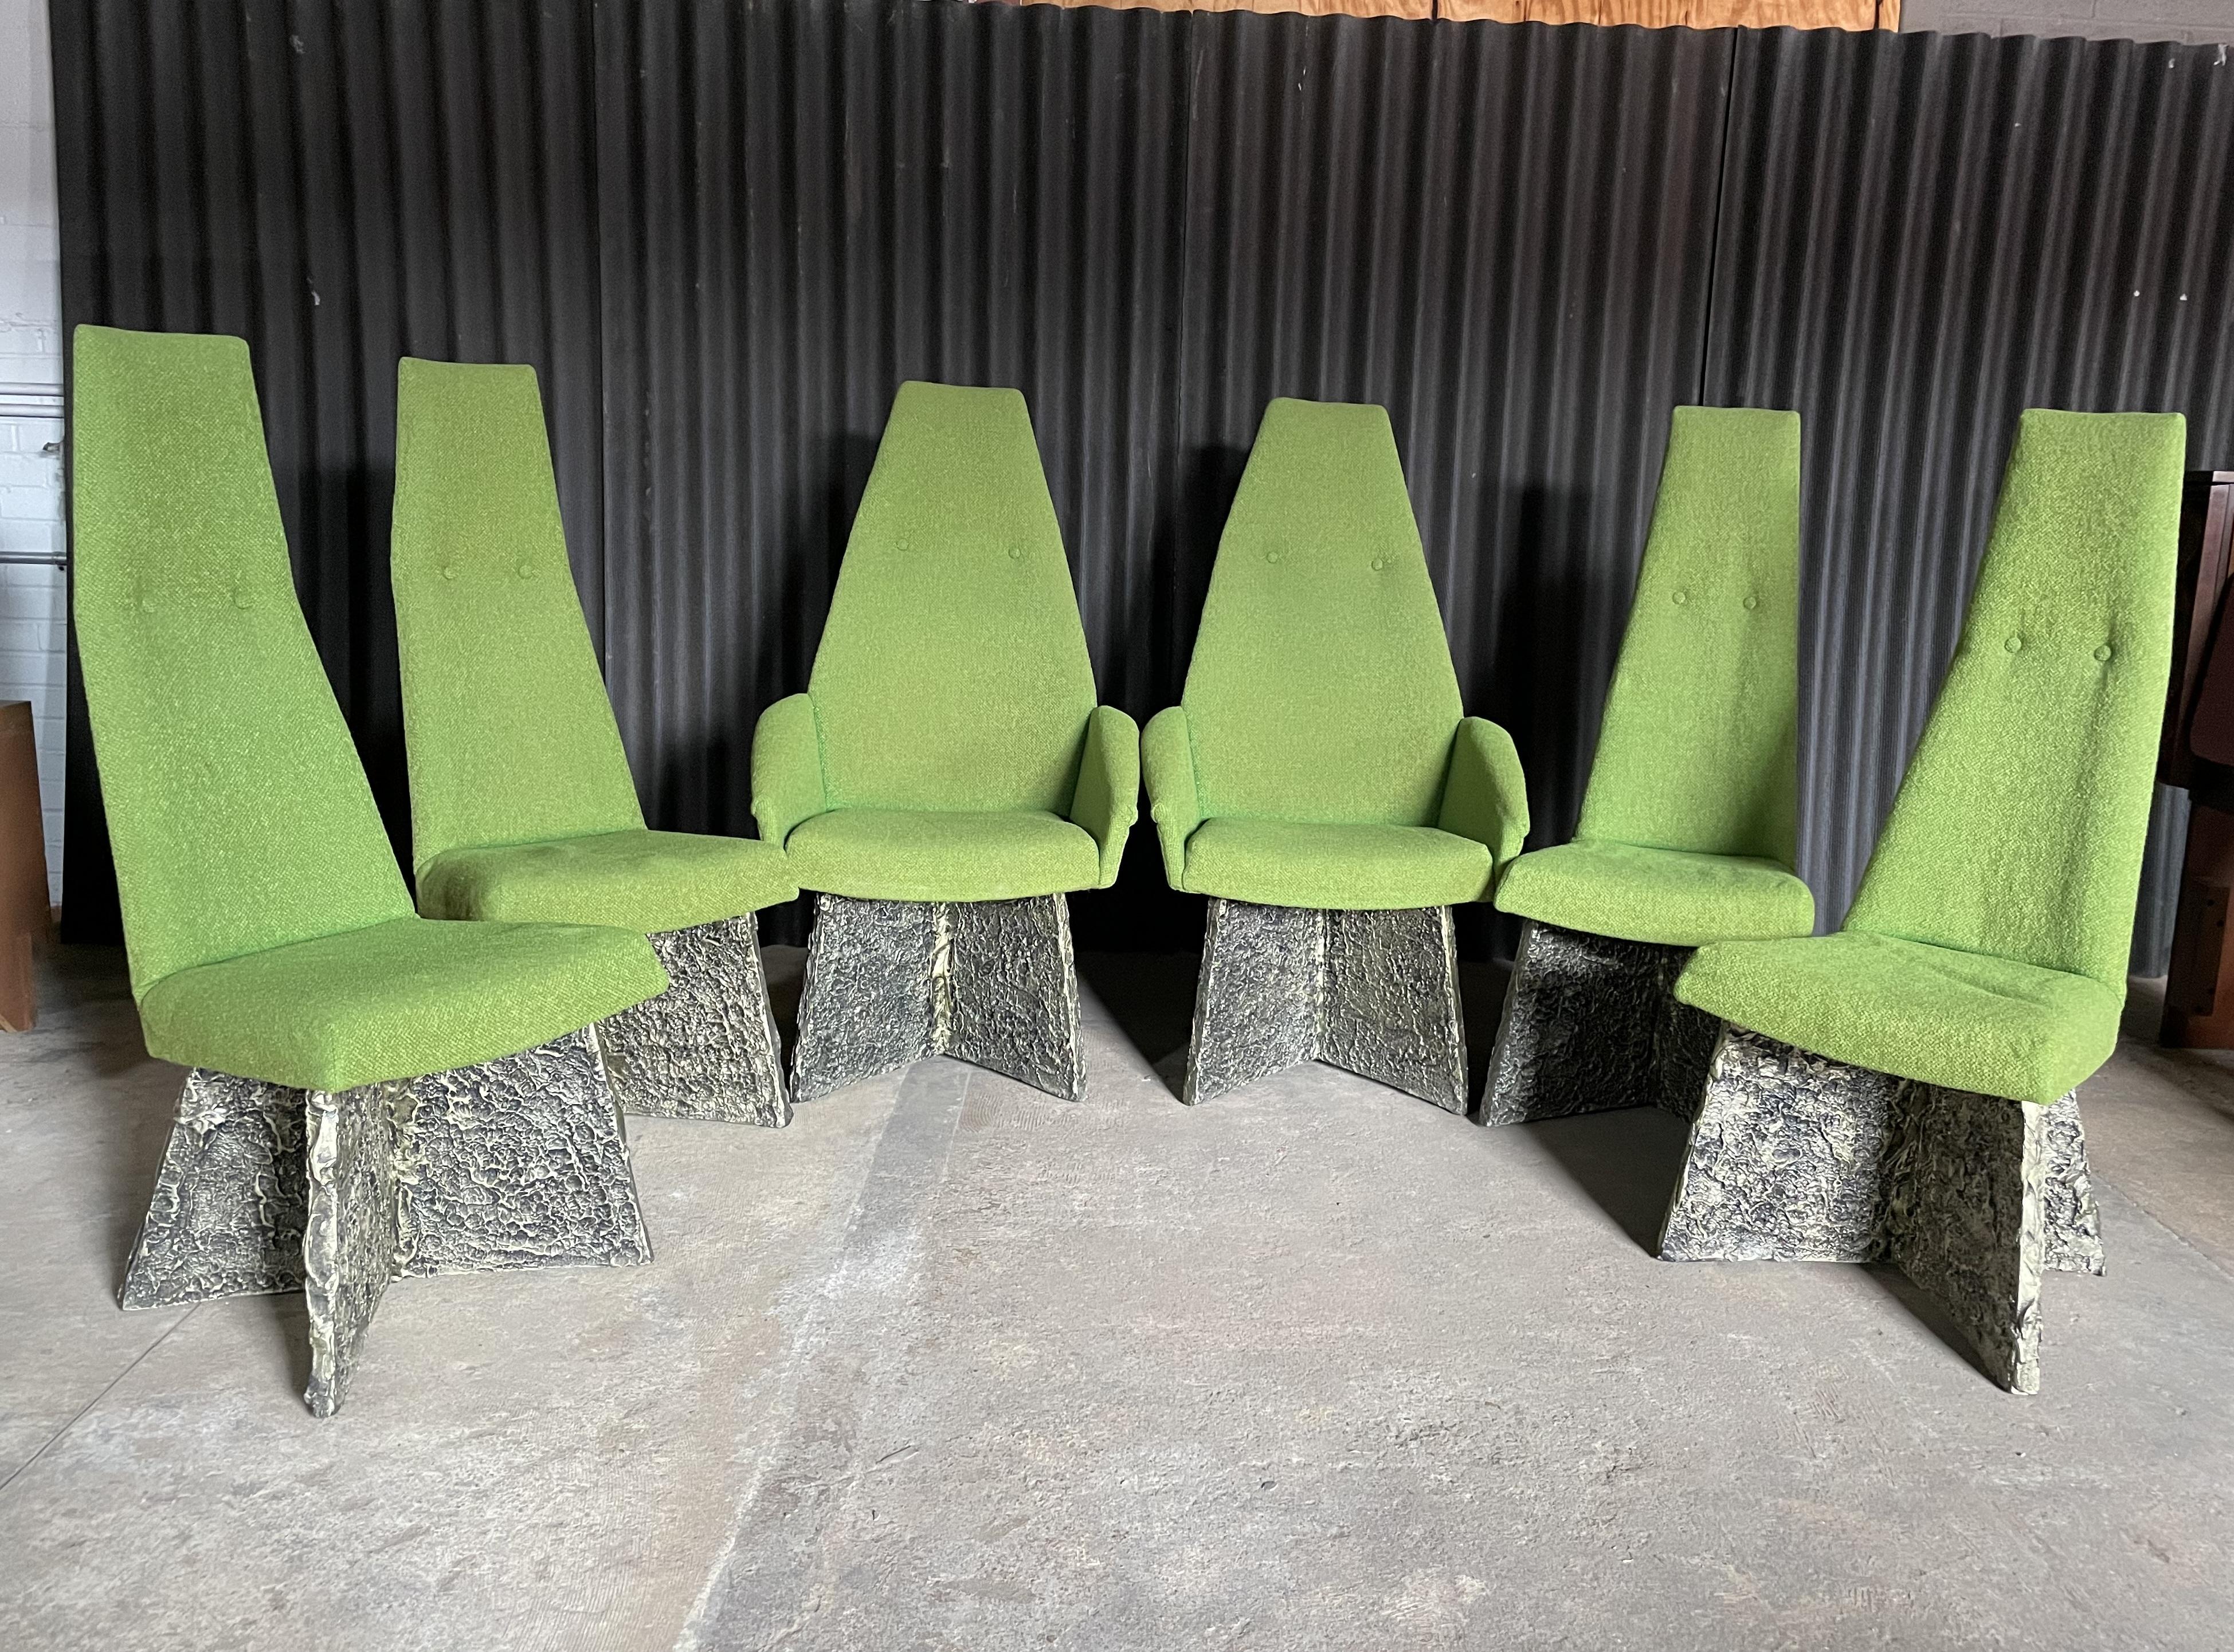 The most spectacular set of Adrian Pearsall brutalist dining chairs out there.
From the sculptured bases to the apple green colored fabric, so Gorgeous!

These iconic pieces are timeless and forever.
The fabric, itself, is in fantastic condition